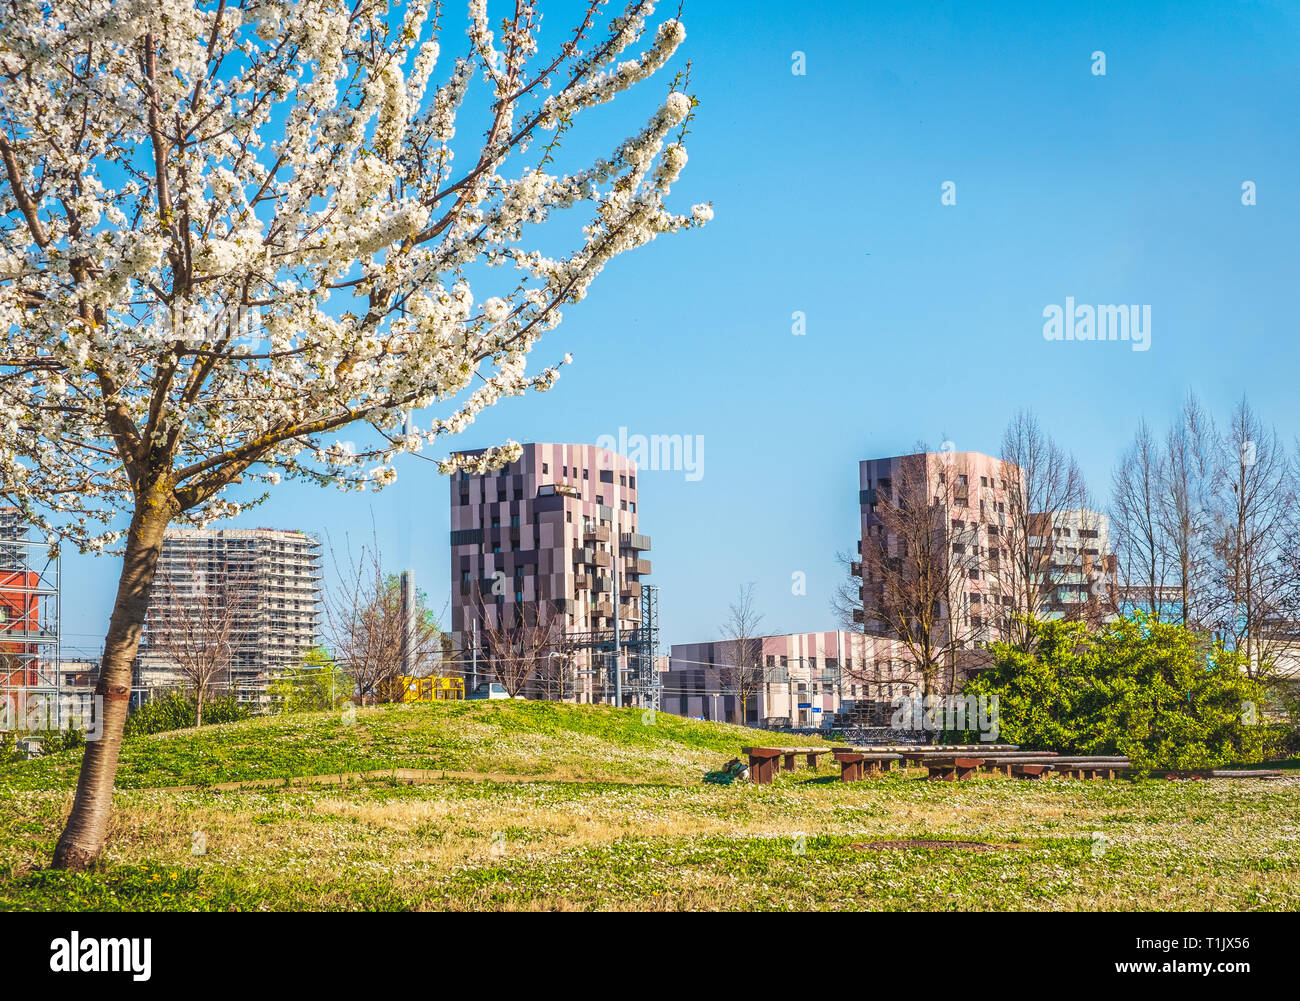 Bologna Quartiere Navile in Italy with Trilogia Navile modern building city park in spring Stock Photo